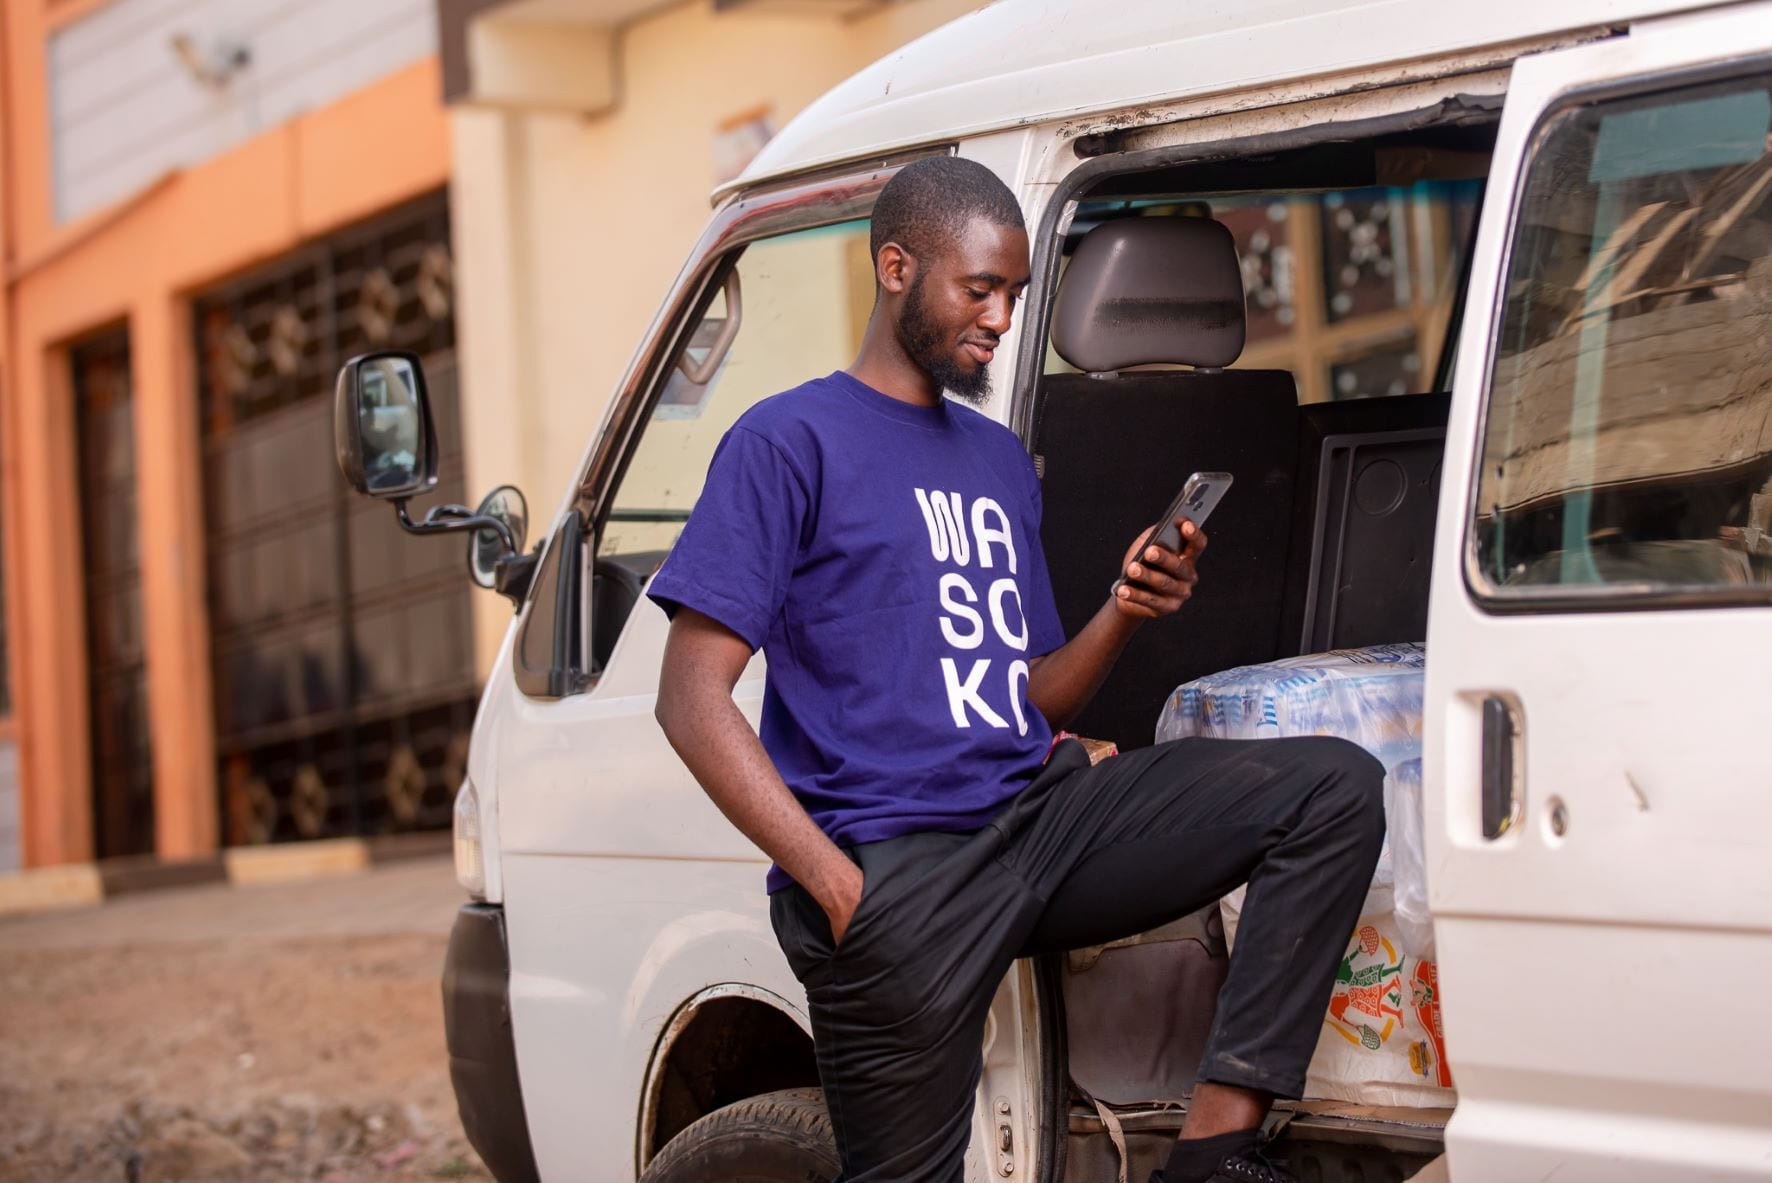 African e-commerce company Wasoko expands to the DRC, aiming to boost local businesses through cross-border operations. Sokowatch closes $125 Million Series B, Rebrands to "Wasoko"